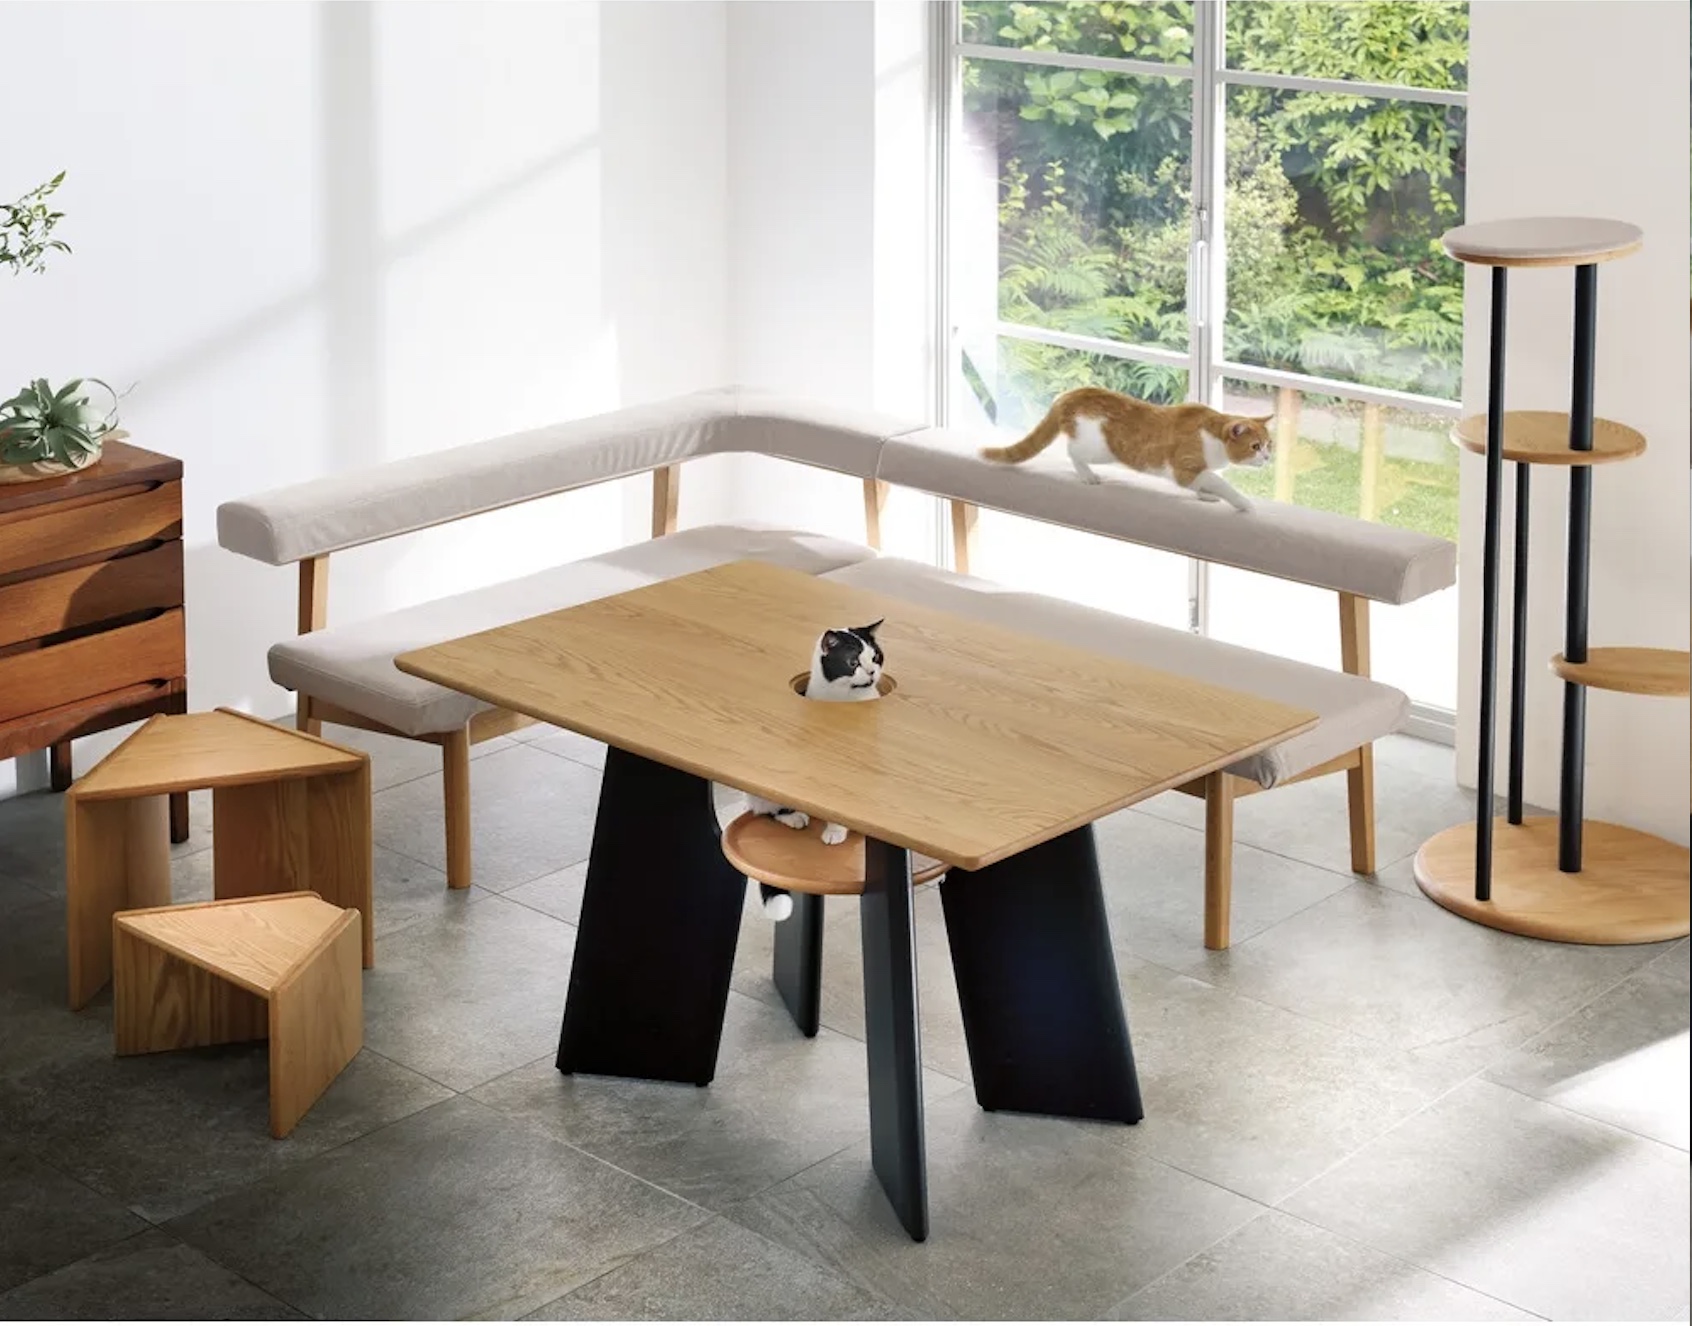 Dinos special pet furniture dining table with cat perch